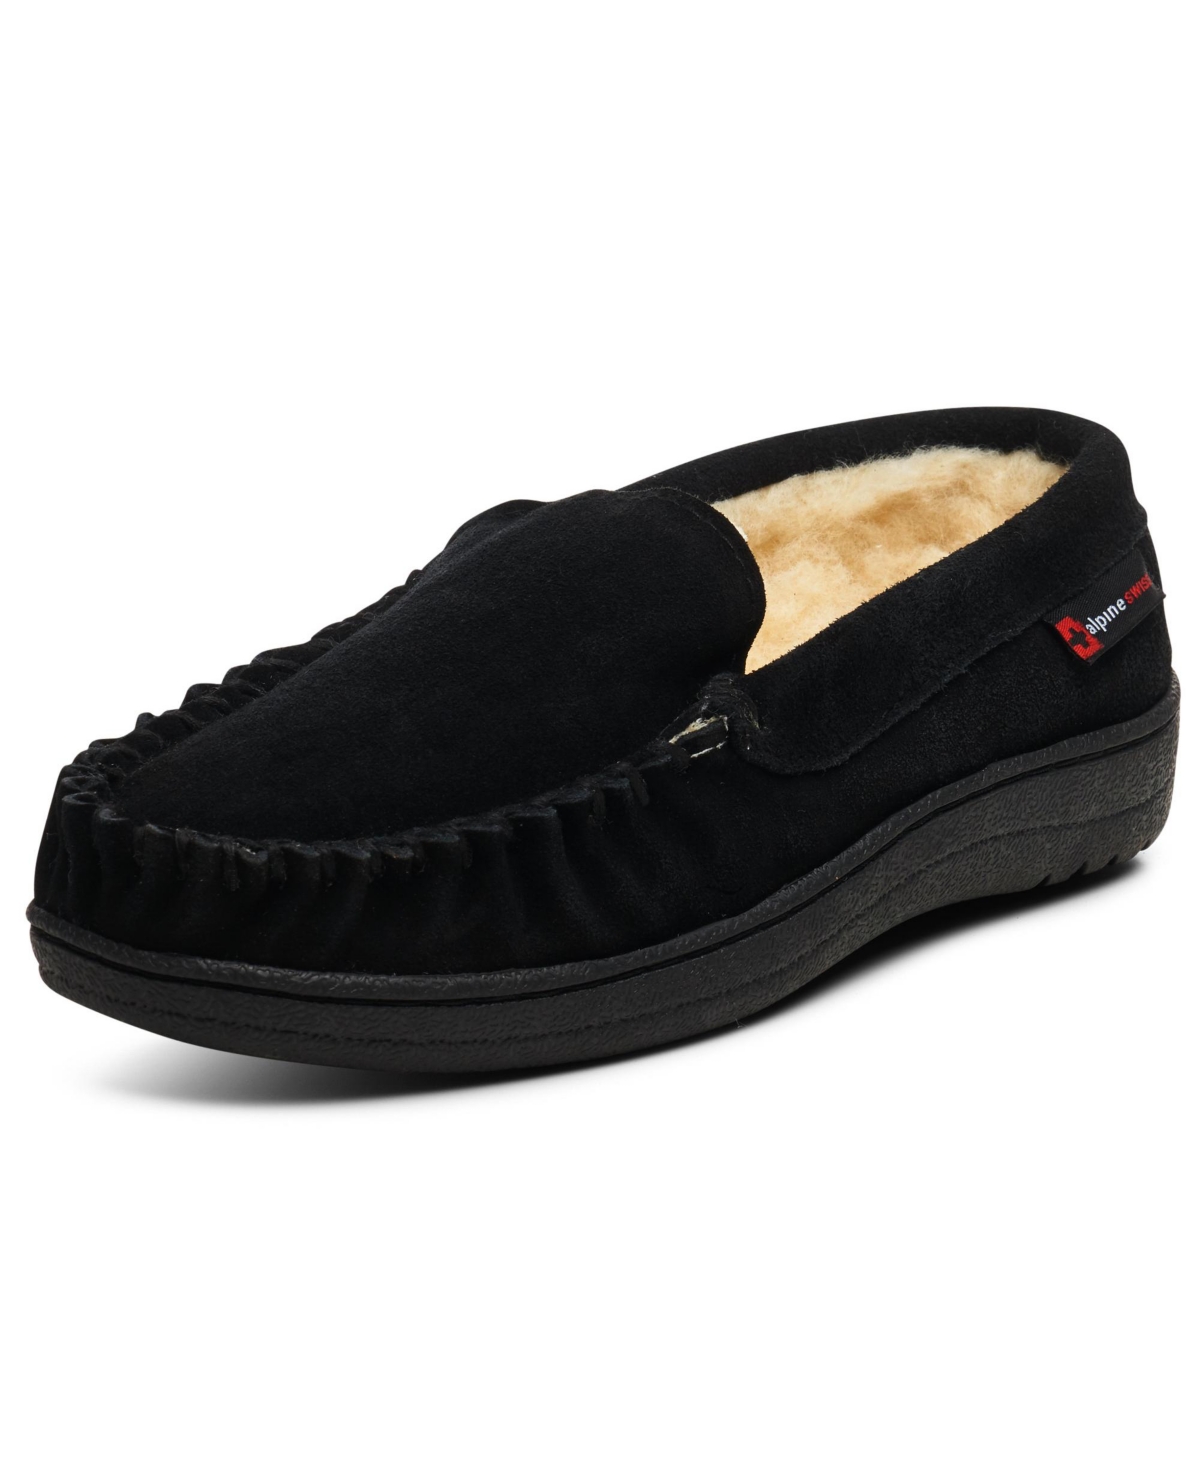 Yukon Men's Suede Shearling Moccasin Slippers Moc Toe Slip On Shoes - Navy